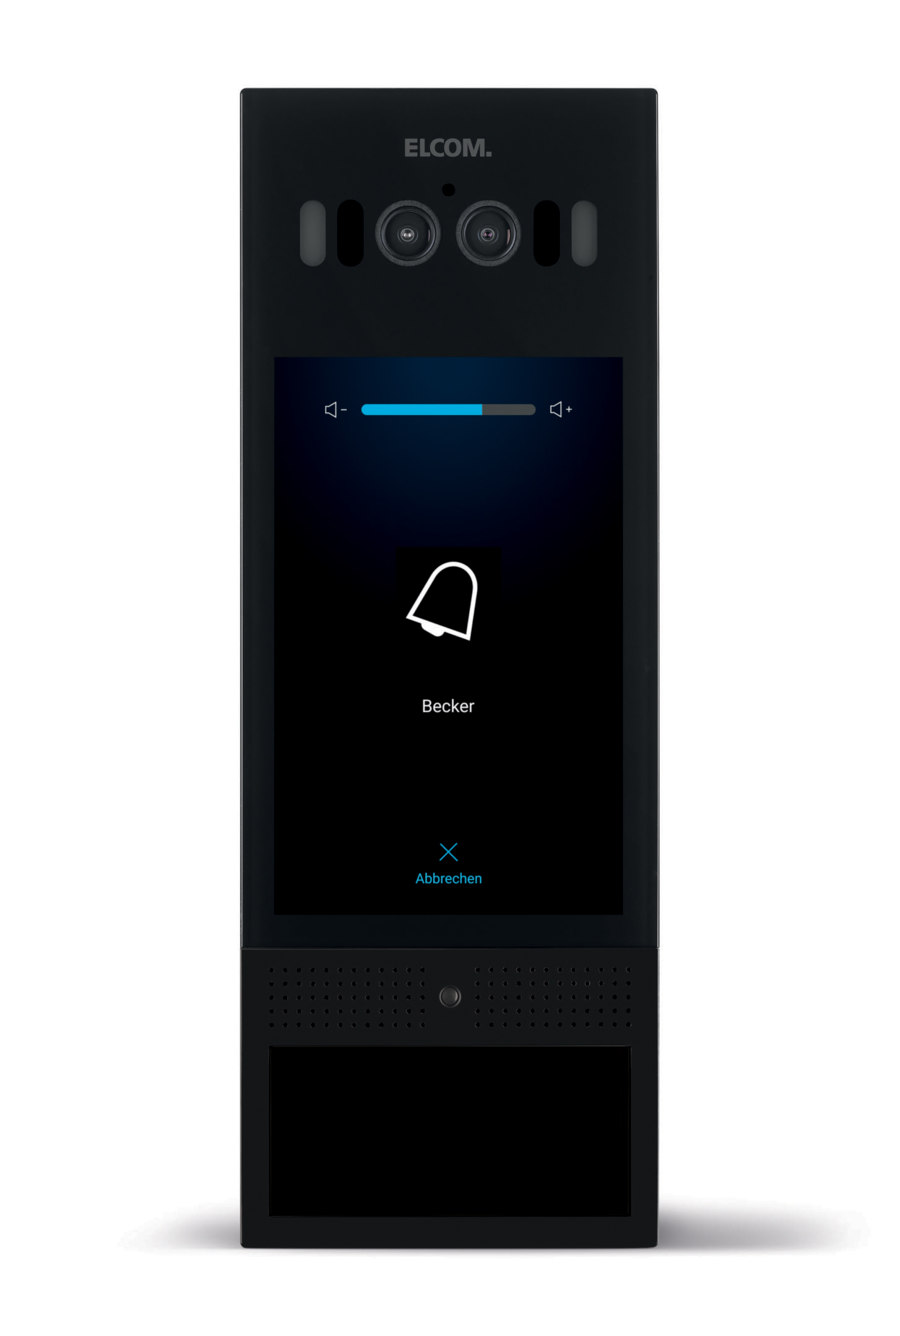 Come in! Digital access control from Elcom by Hager | Novedades